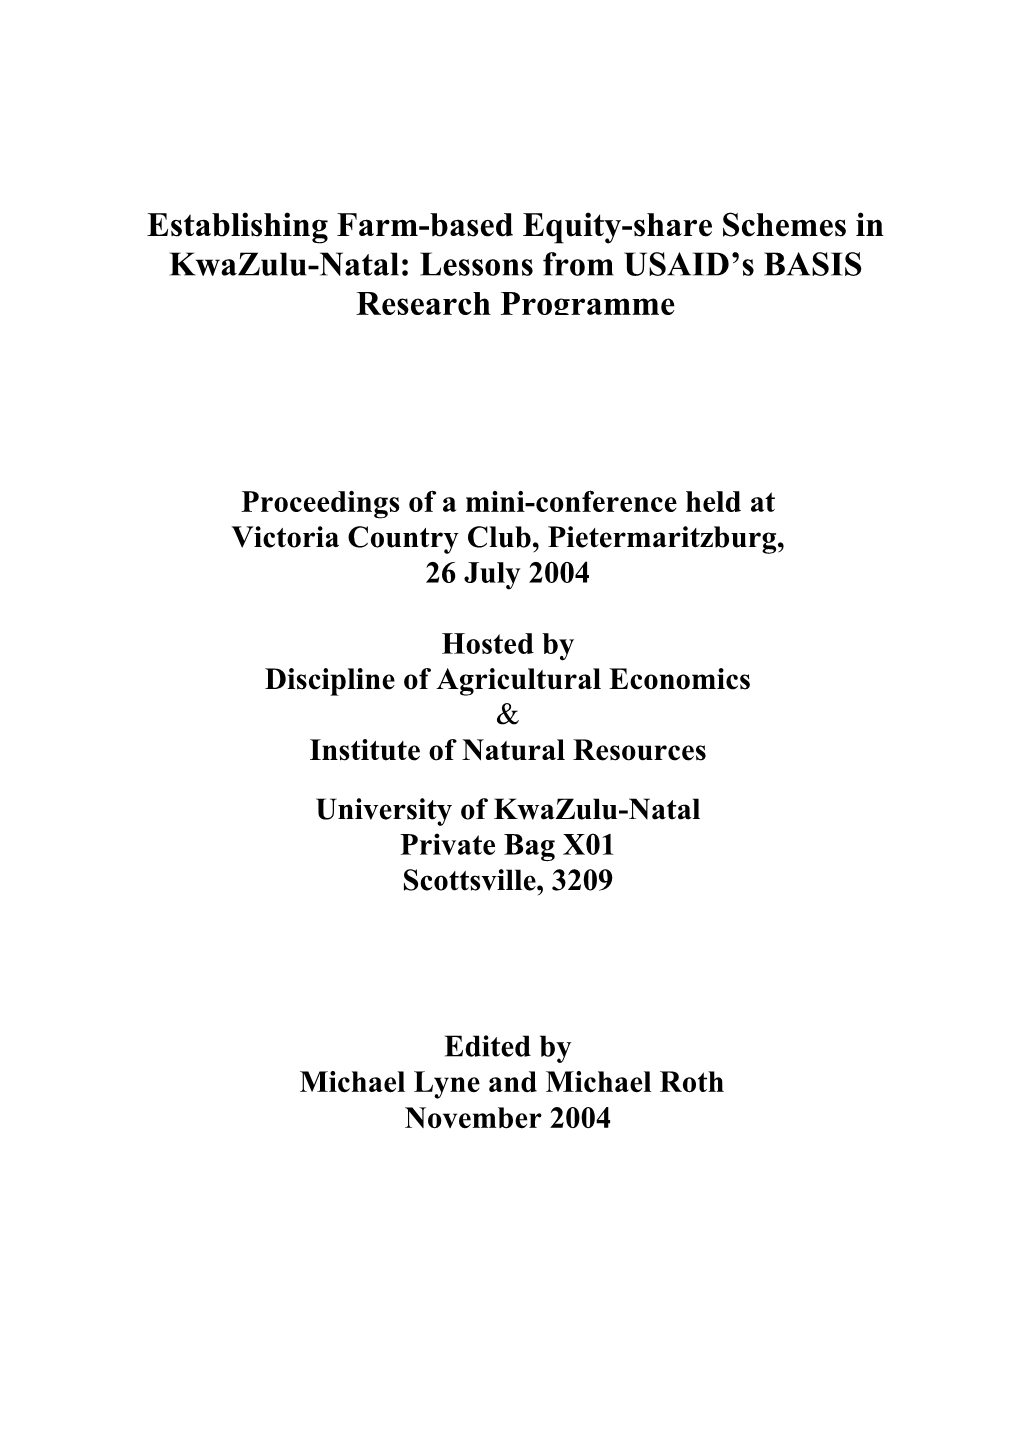 Establishing Farm-Based Equity-Share Schemes in Kwazulu-Natal: Lessons from USAID’S BASIS